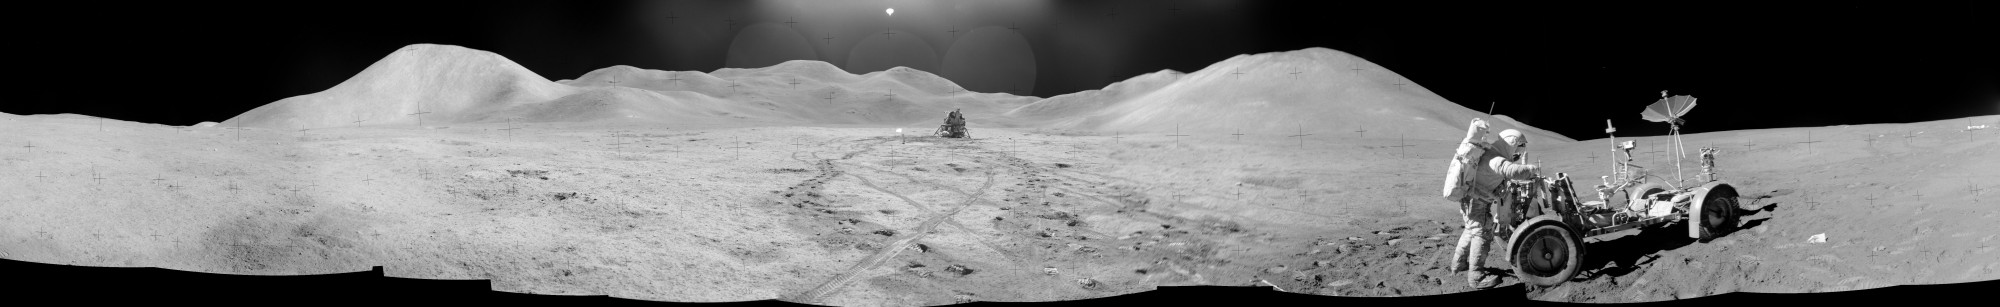 Moon Pan - Hadley Delta with LM and LRV